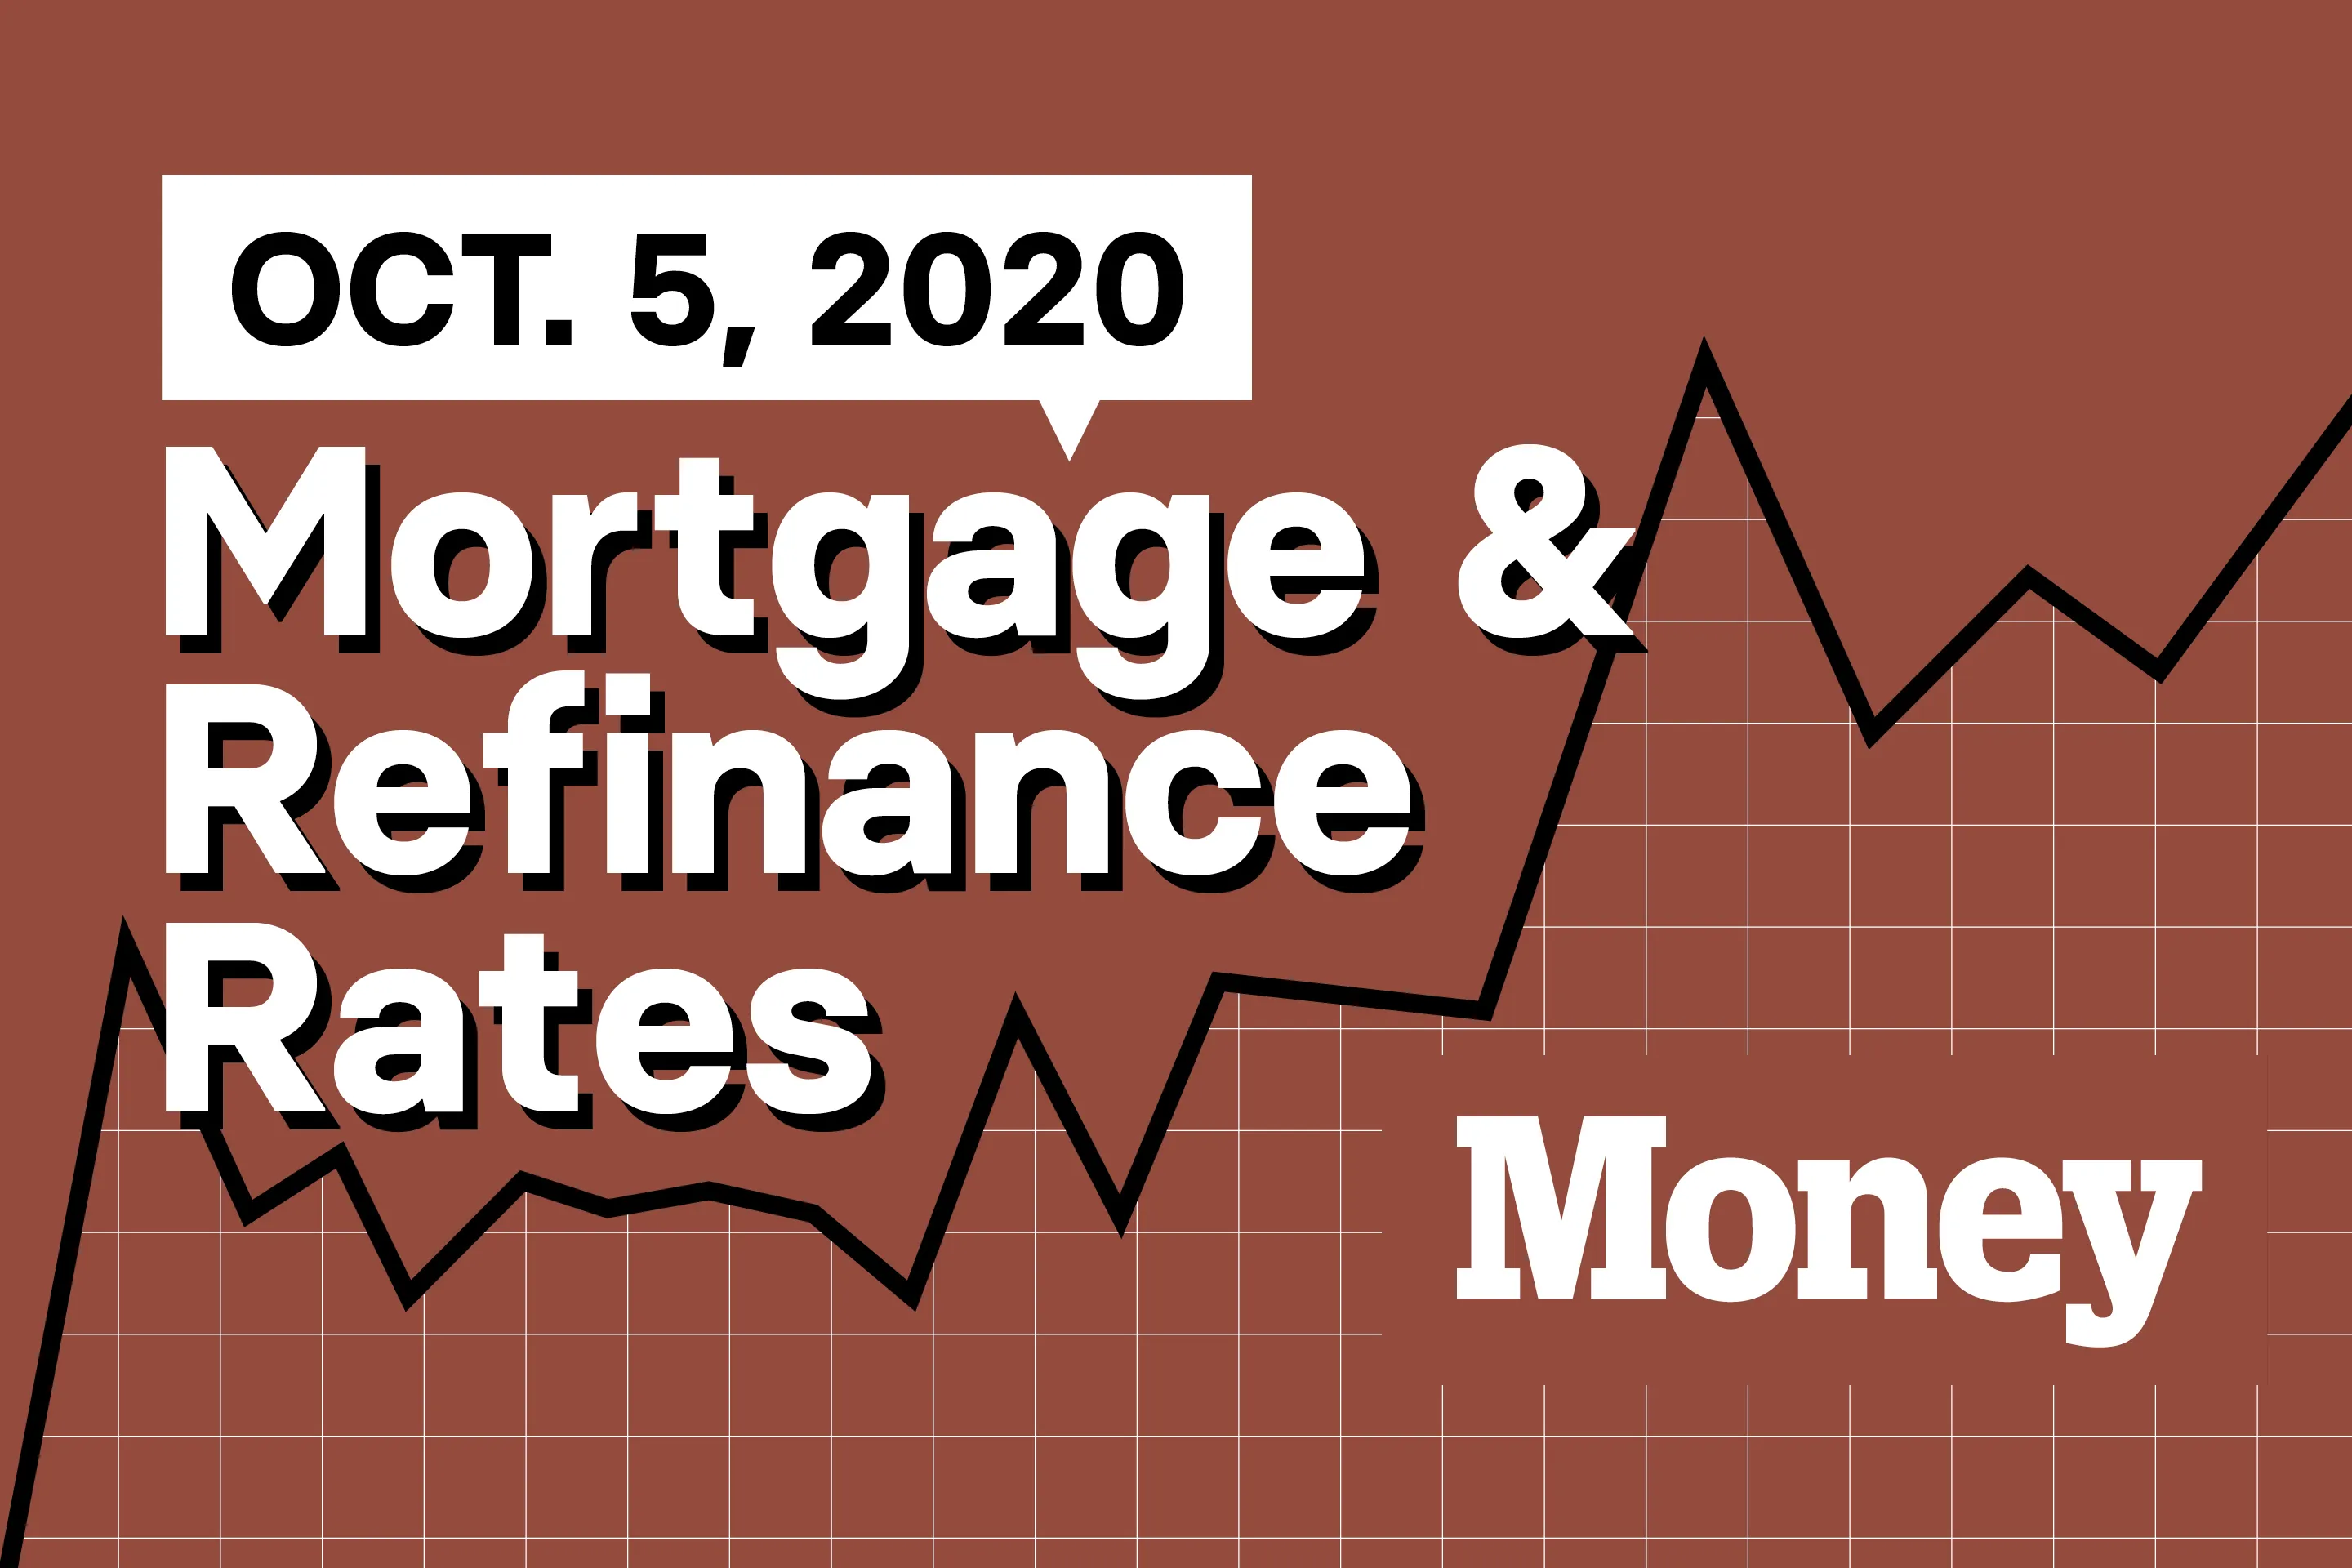 Here Are Today's Best Mortgage & Refinance Rates for October 5, 2020